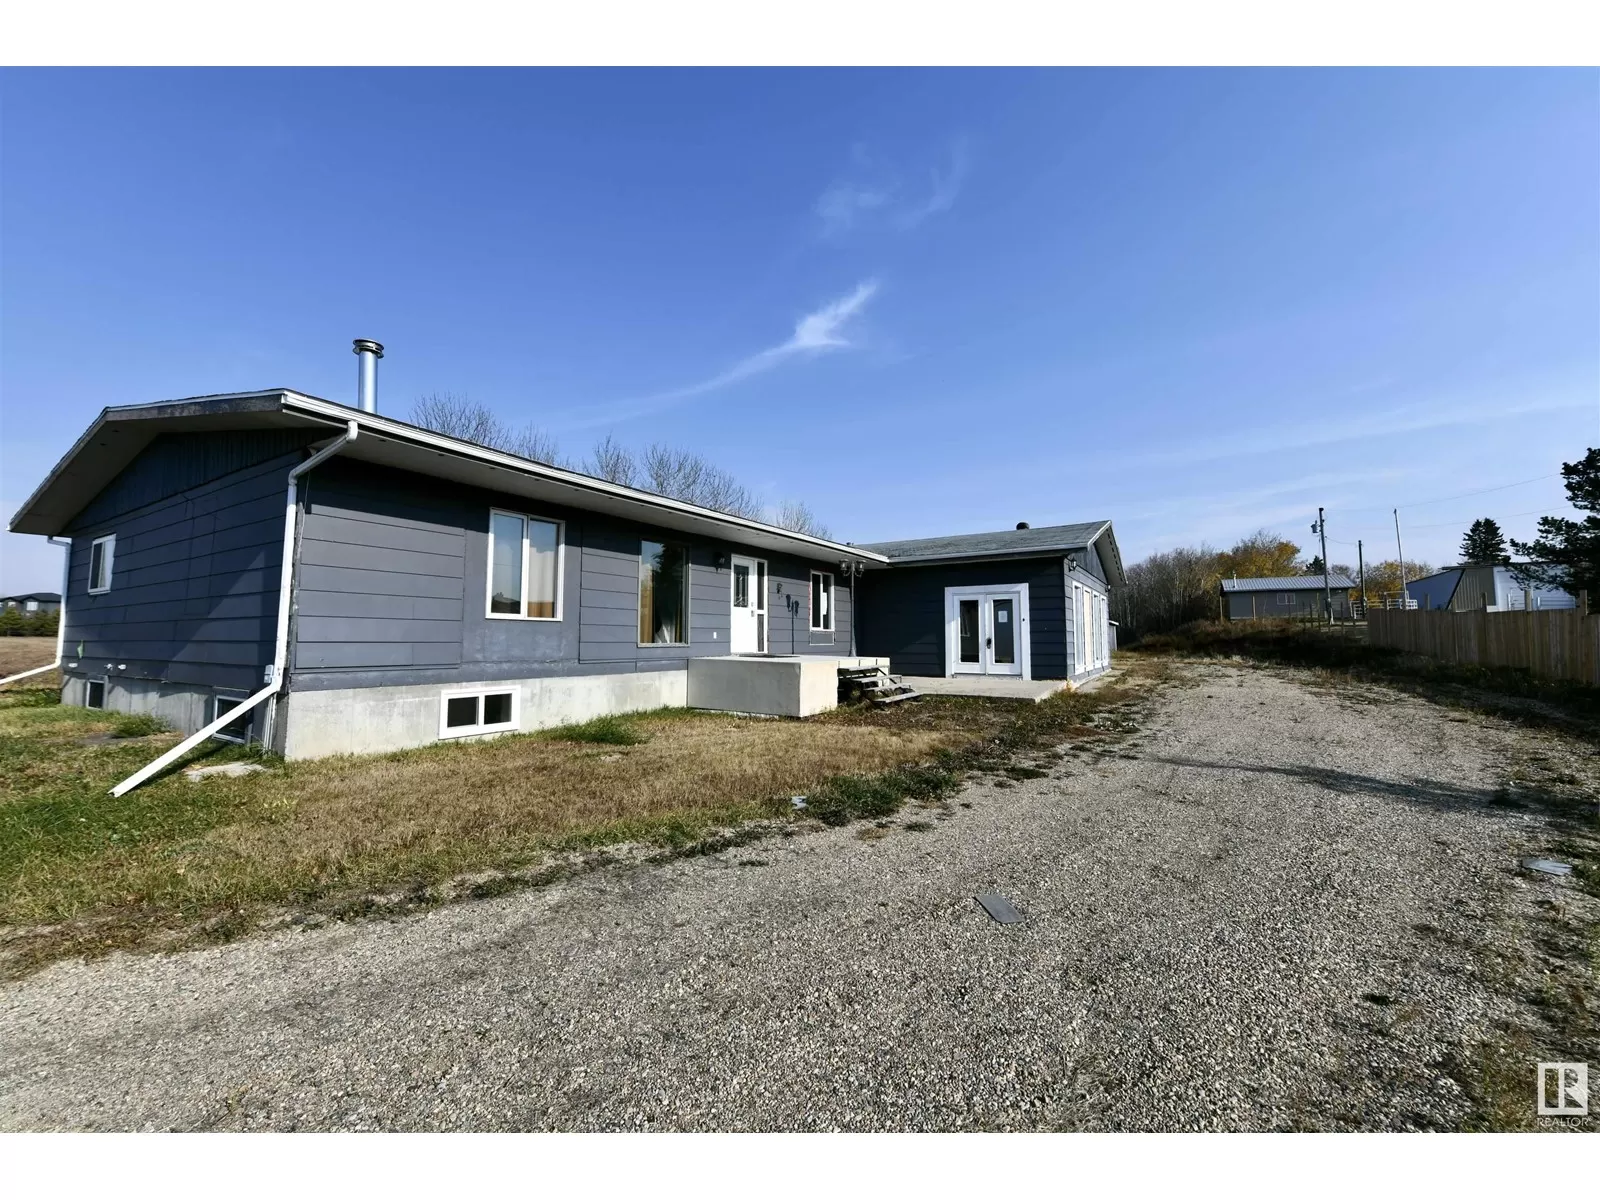 House for rent: B 58119 Rr 90, Rural St. Paul County, Alberta T0A 3A1